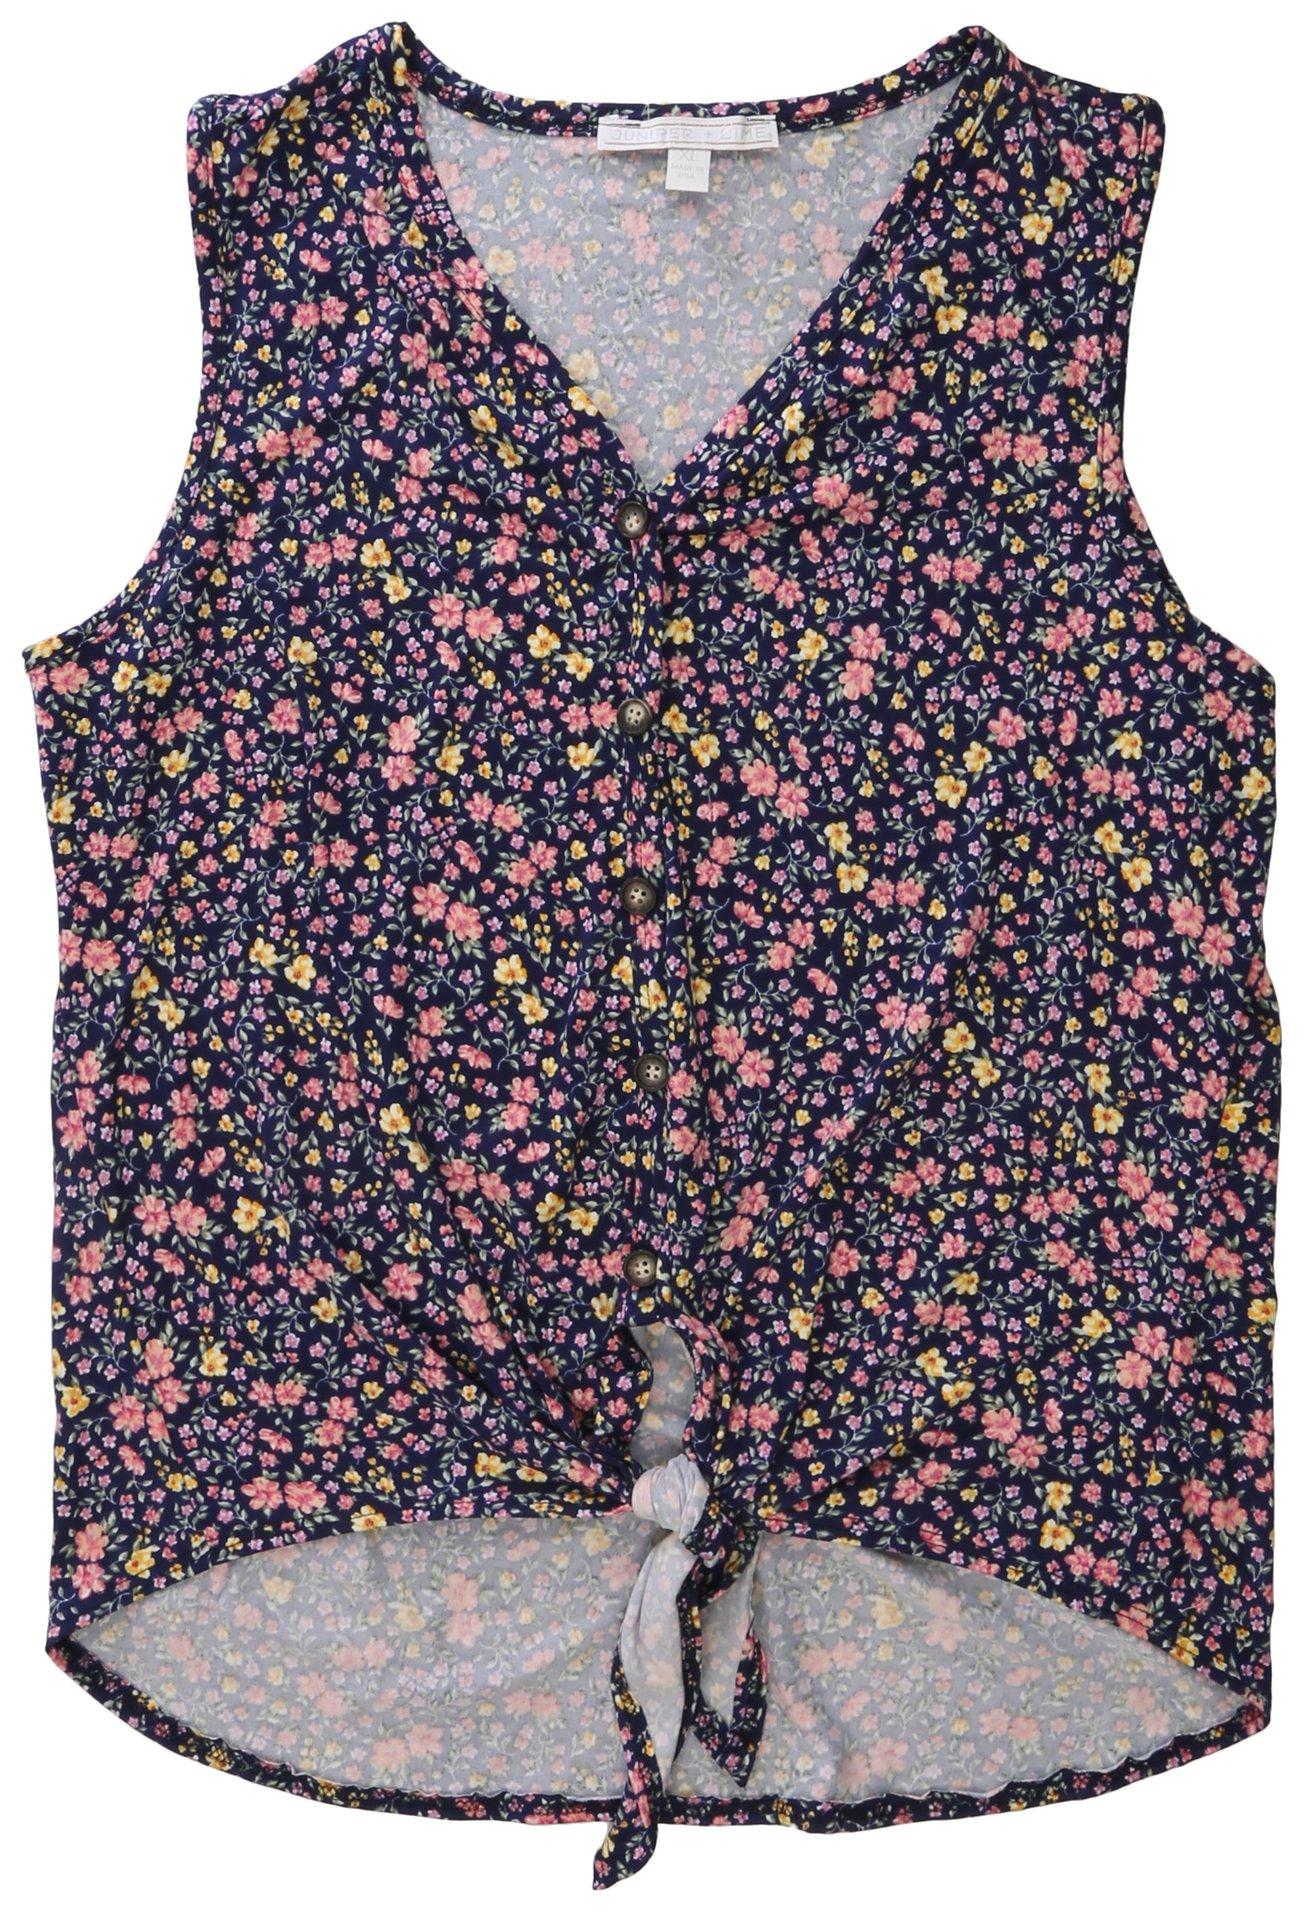 Juniper + Lime Womens Floral Tie Front Sleeveless Top